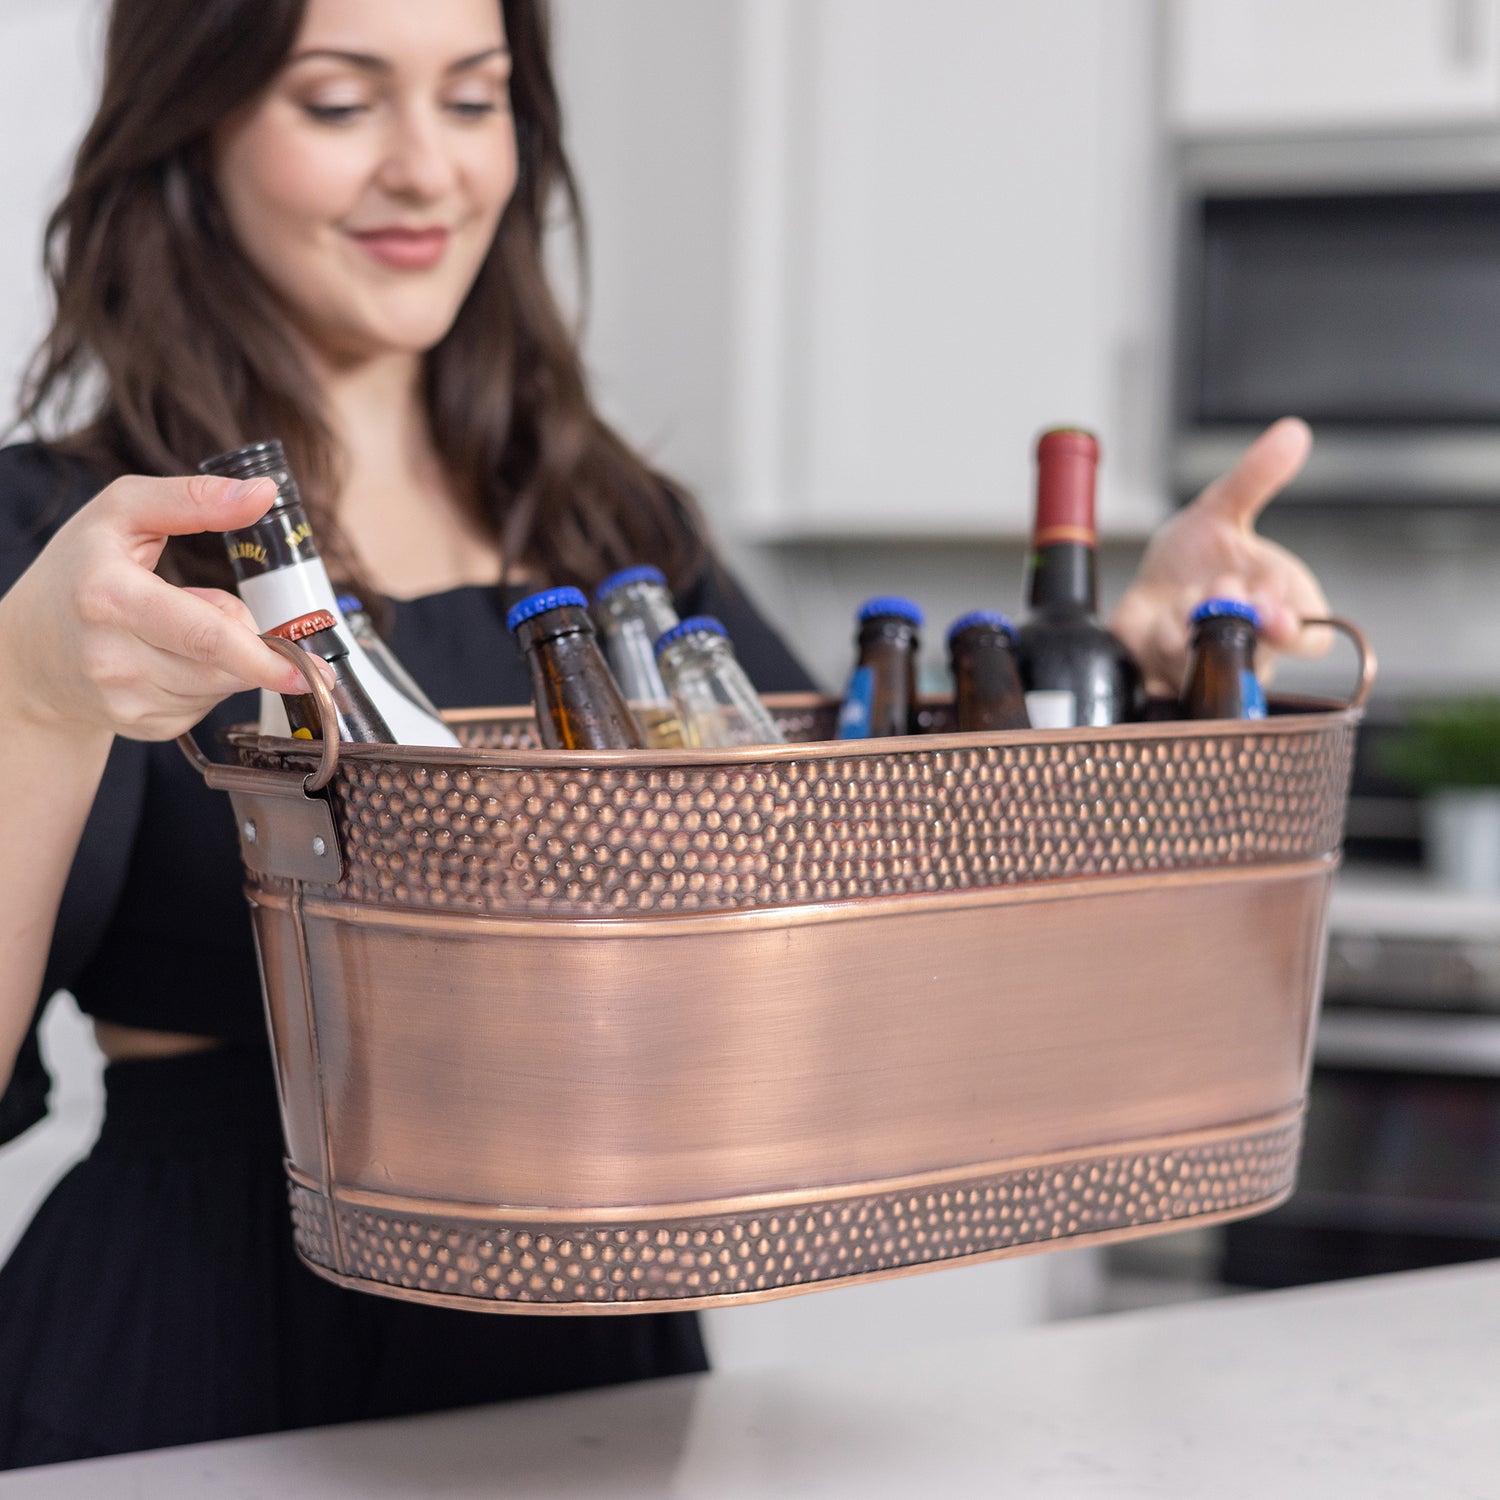 Oval copper drink tub to chill drinks for parties.  Keep wine, beer, and other drinks cold for hours.  Great to use when celebrating a holiday or housewarming part.